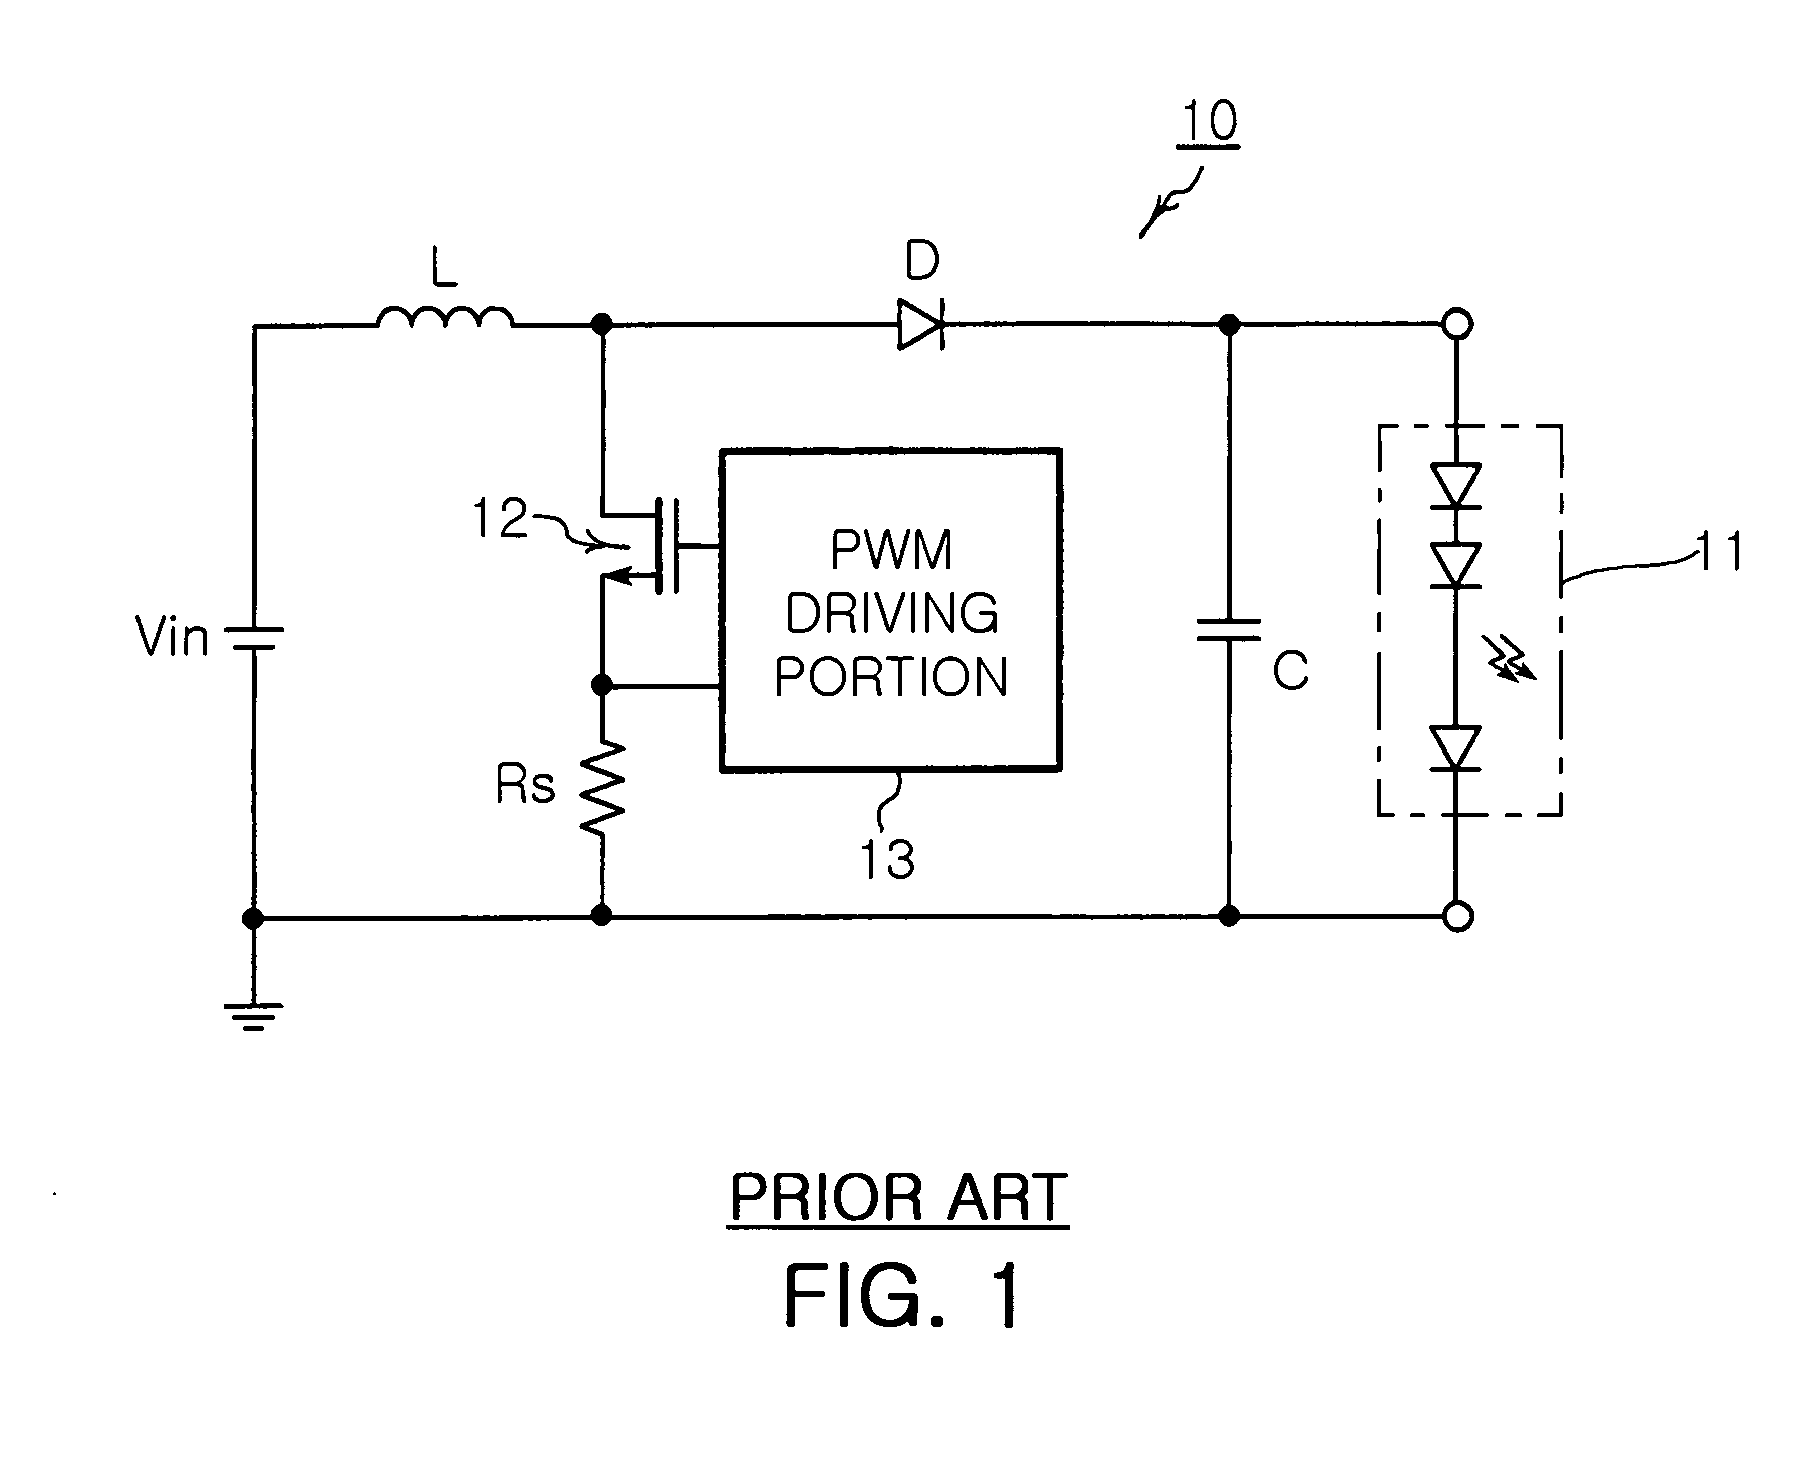 LED driving device of overvoltage protection and duty control